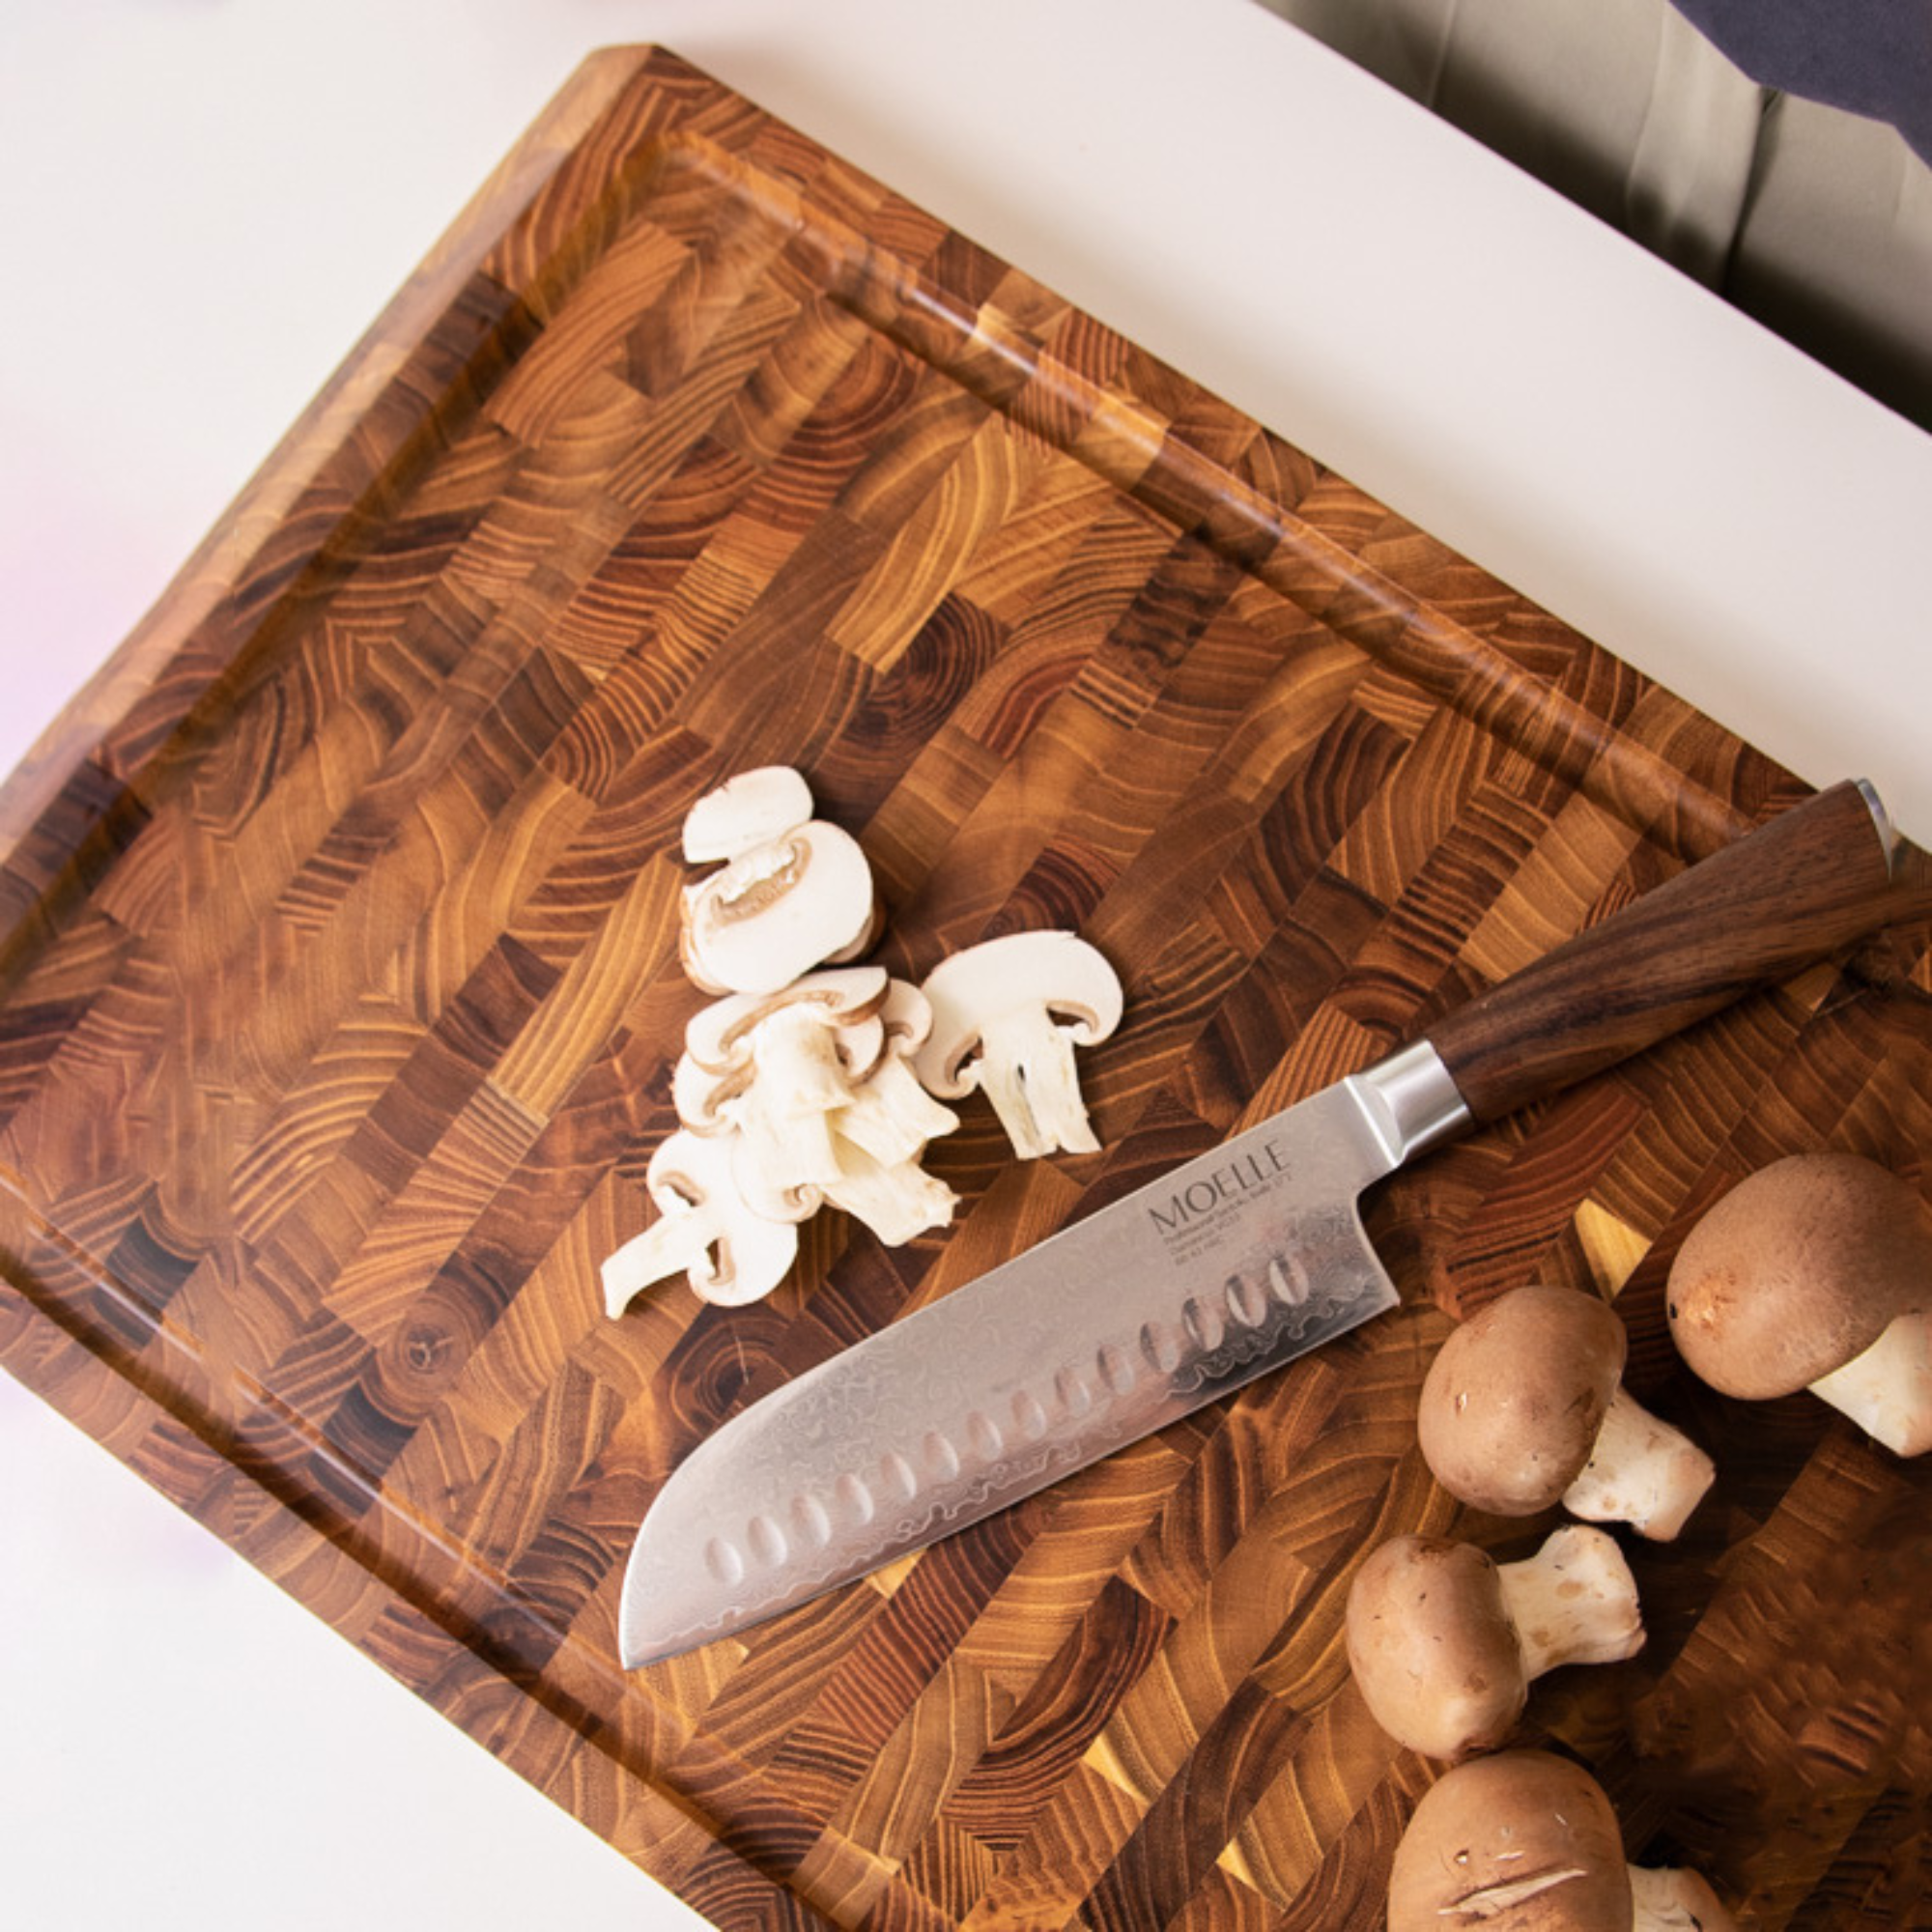 Professional Knives For Restaurants Buying Guide